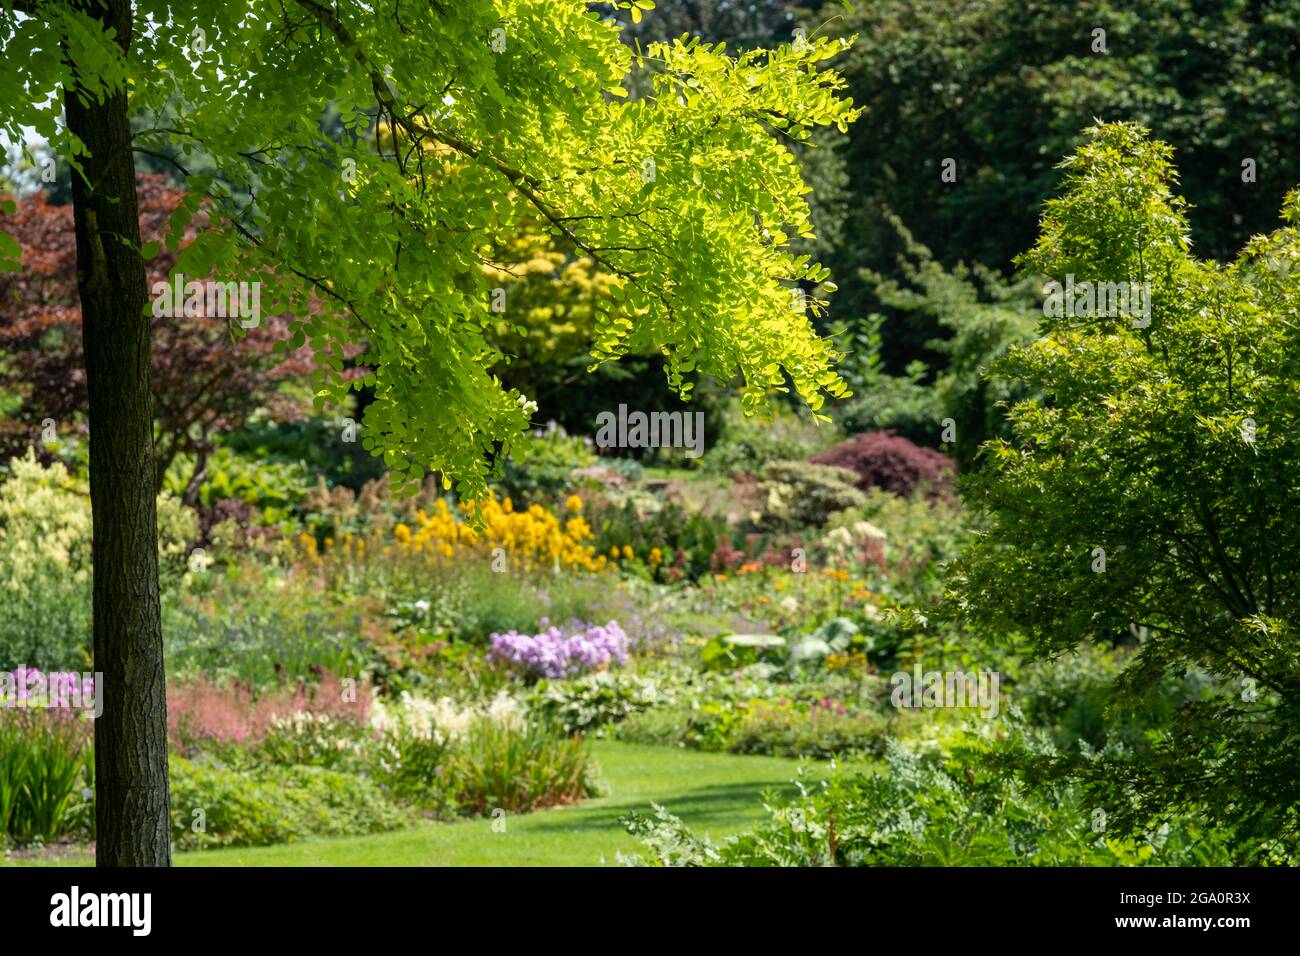 Bressingham Gardens near Diss in Norfolk. Colourful garden in naturalistic planting style with broad colour palette.Gleditsia tree in foregound. Stock Photo